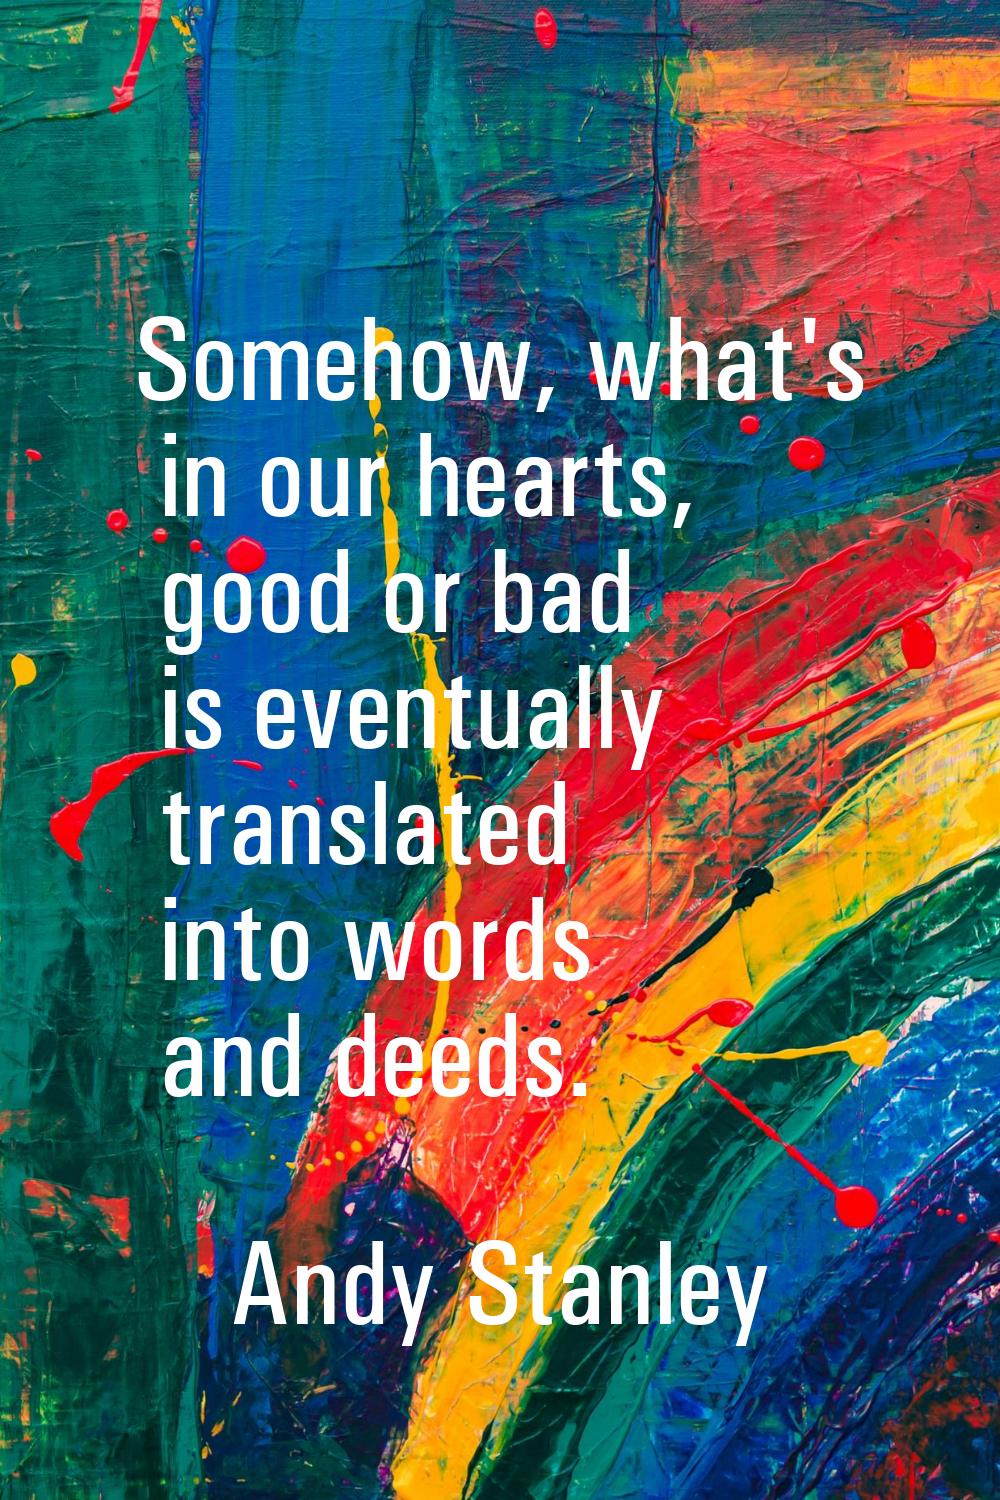 Somehow, what's in our hearts, good or bad is eventually translated into words and deeds.